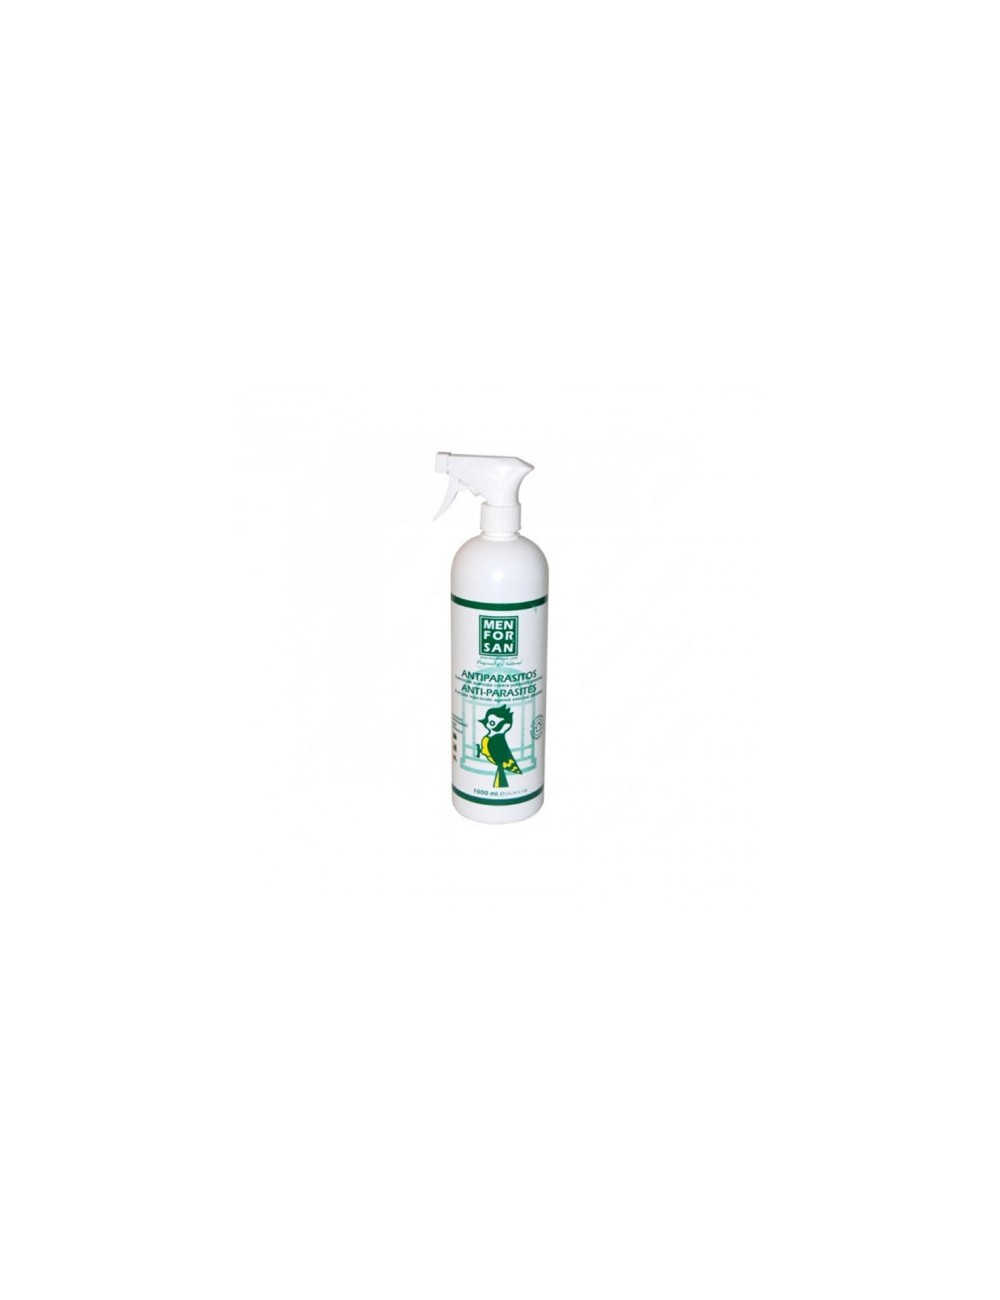 INSECTICIDA AVES MENF 750ML